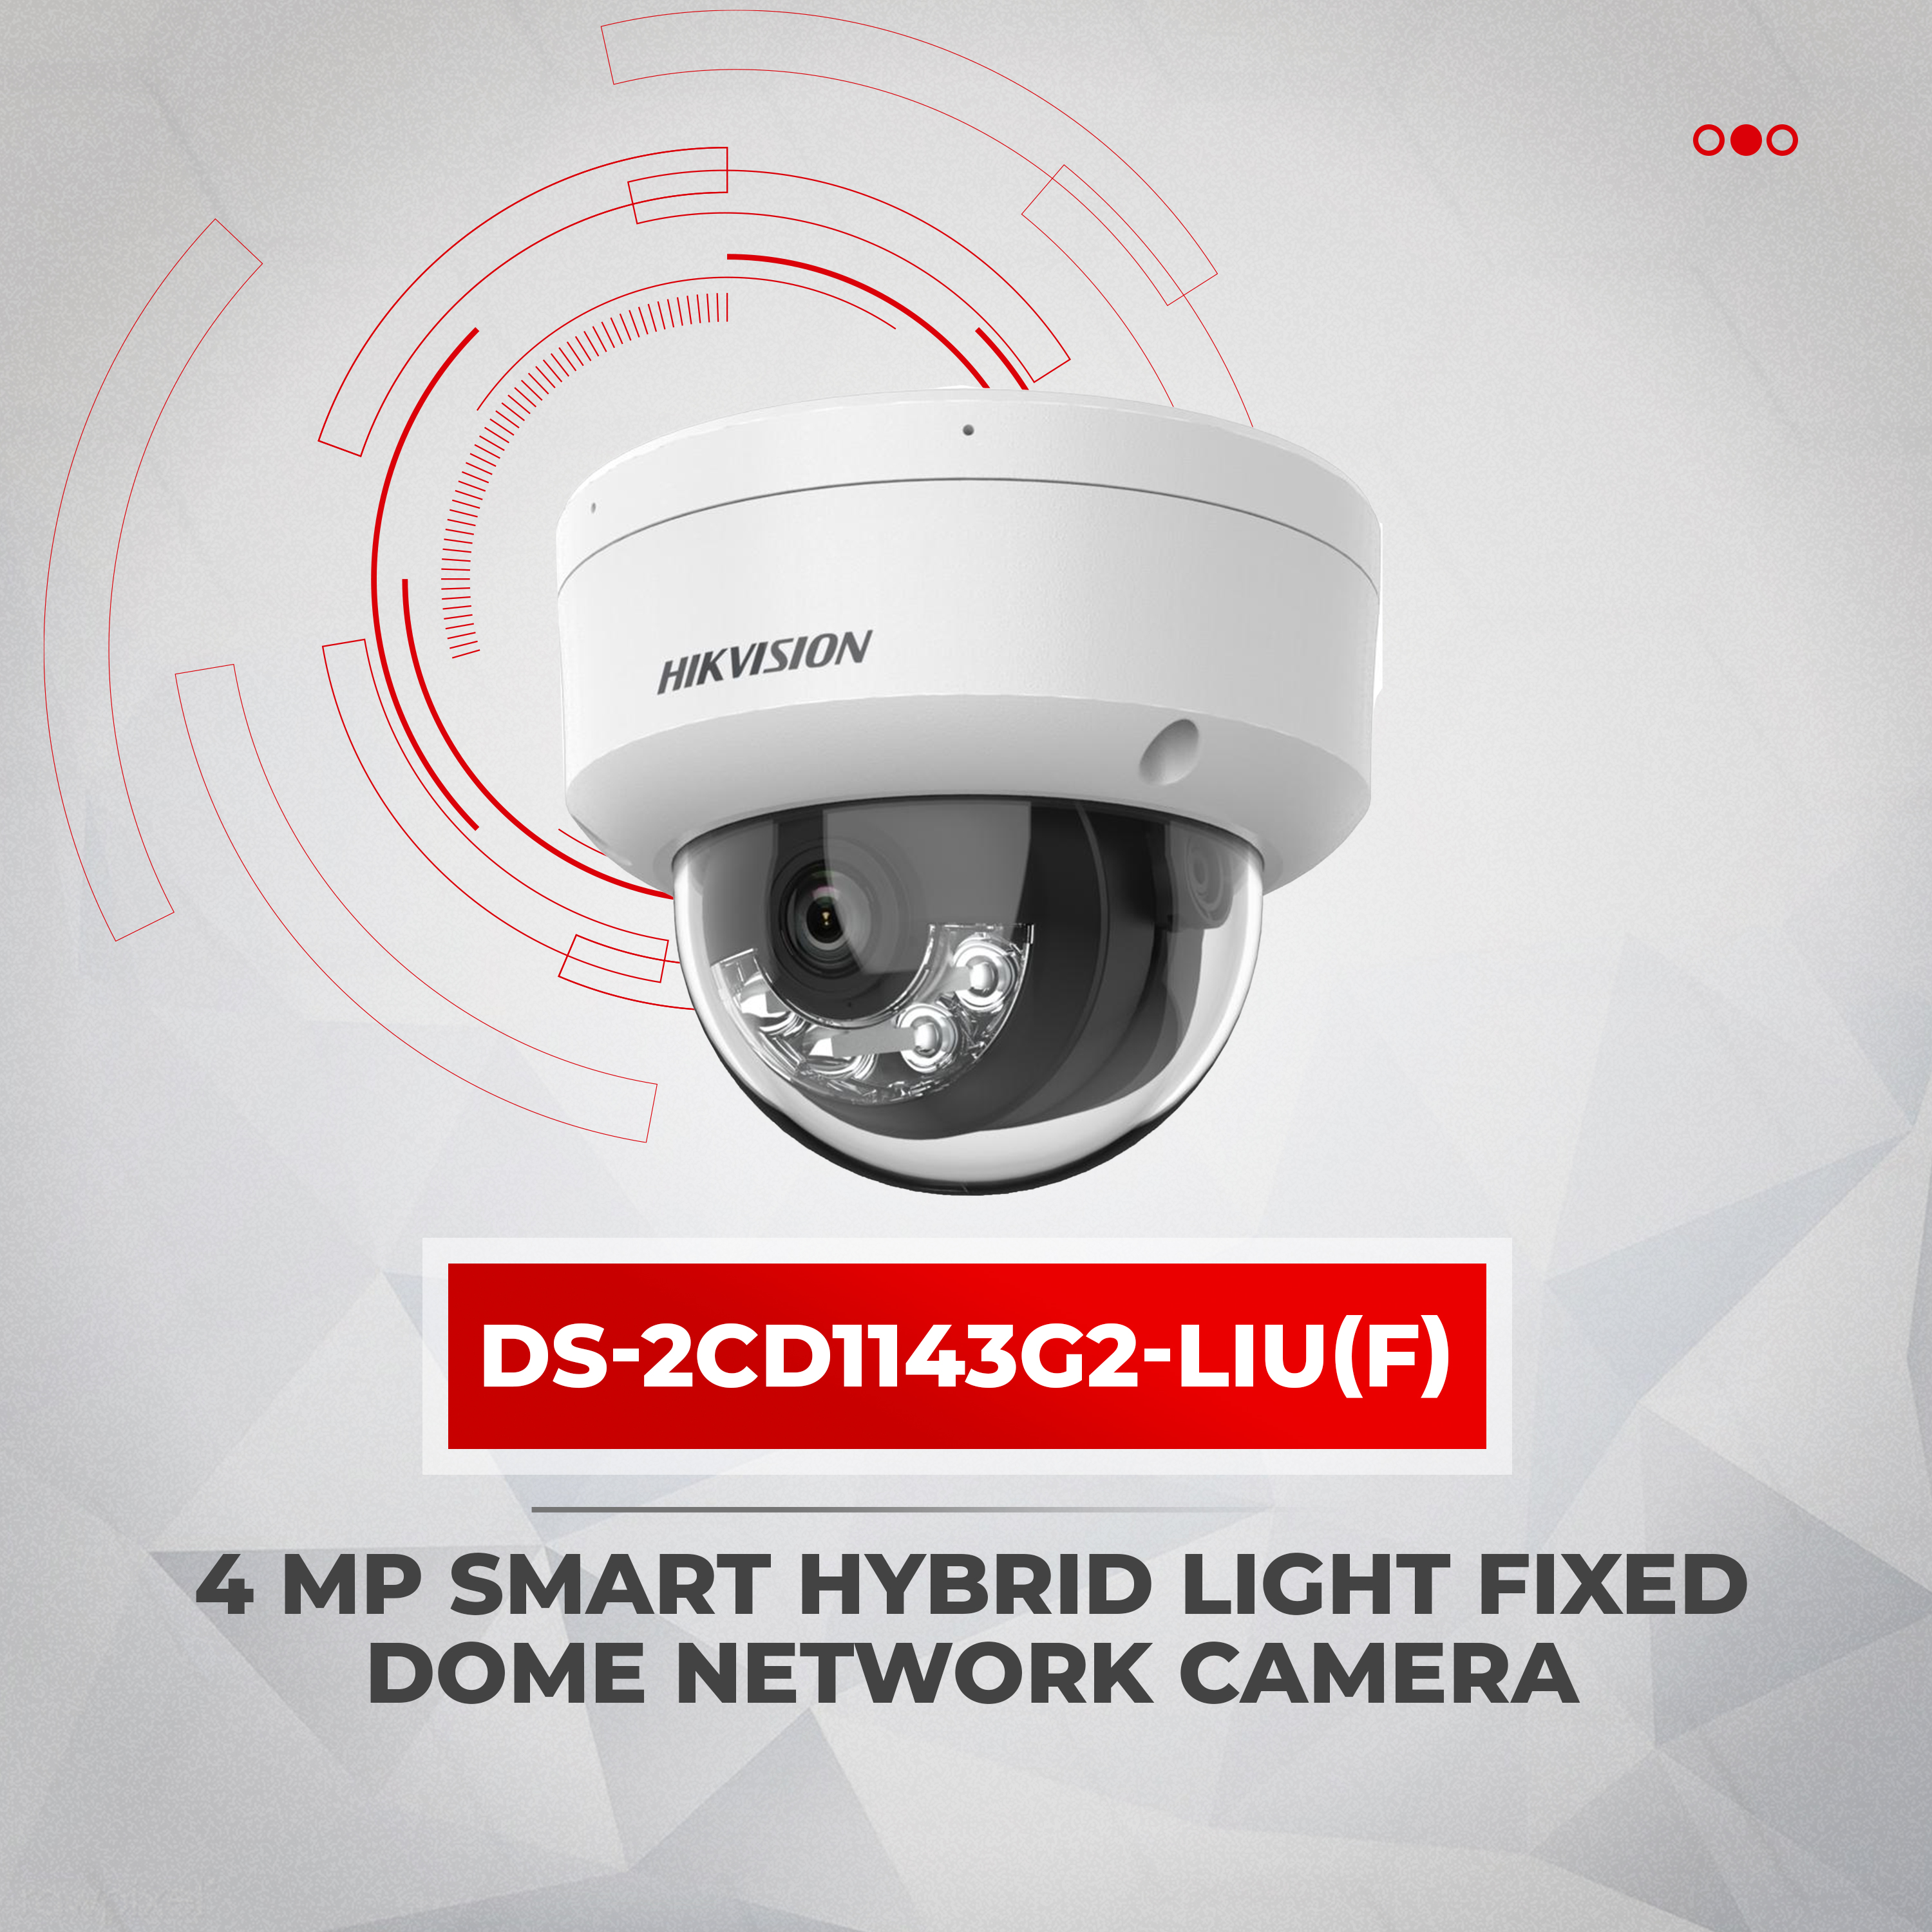 Cctv Hikvision 4 Mp Smart Hybrid Light Fixed Dome Network Security Surveillance Camera 